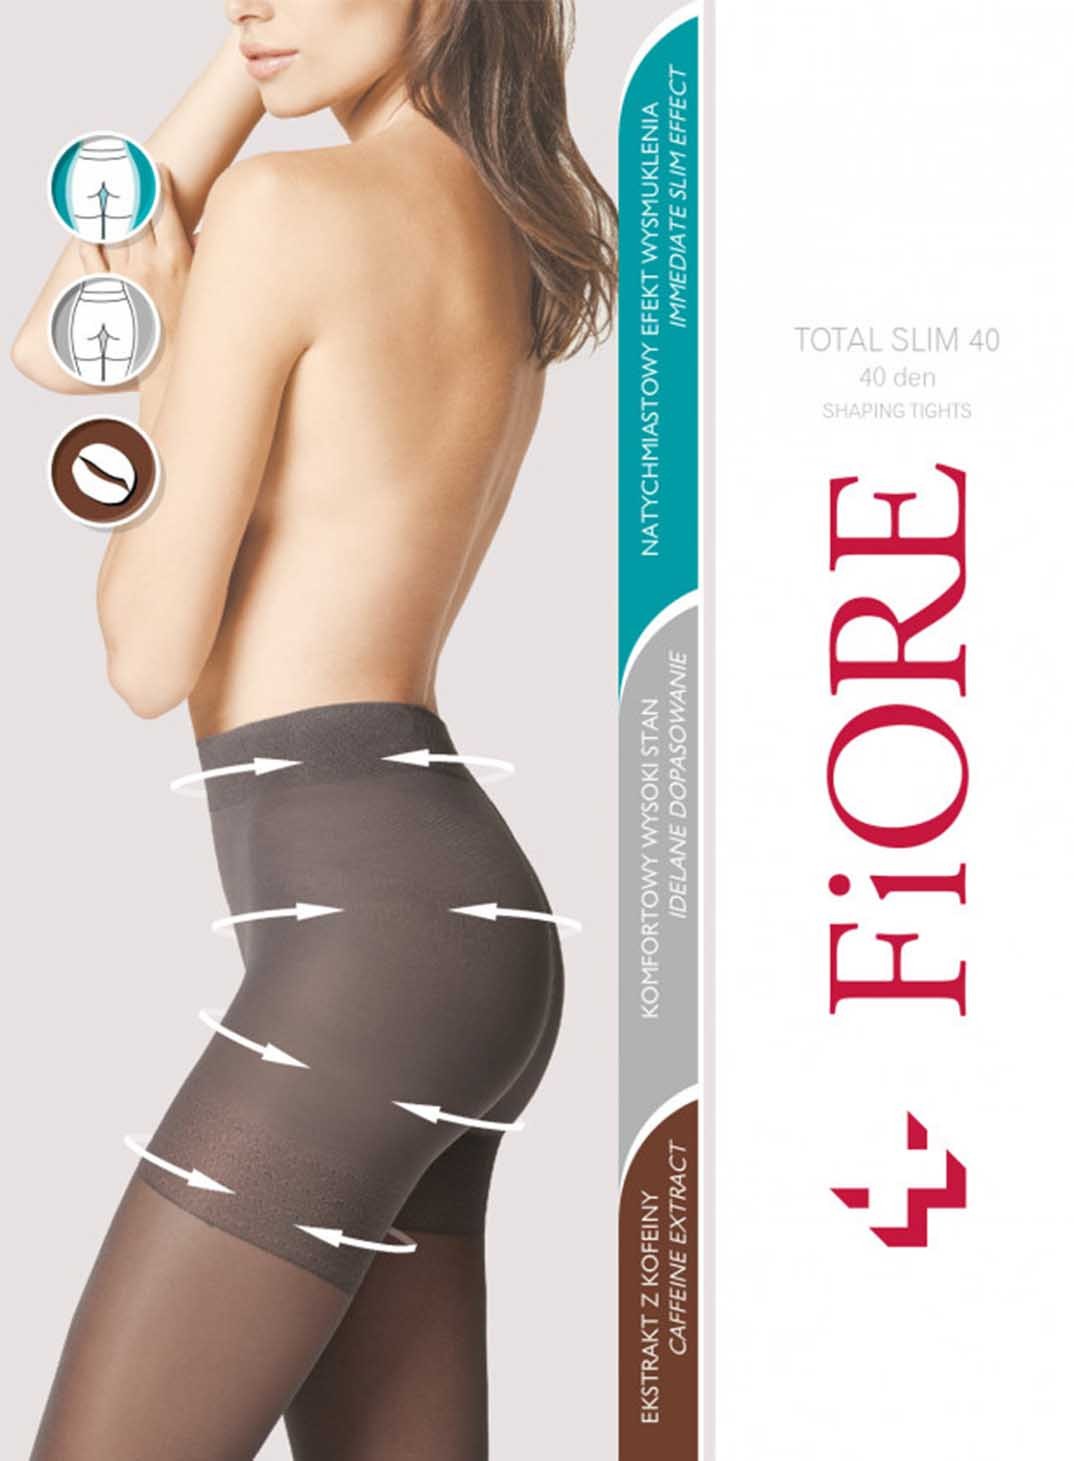 Collant gainant anti-cellulite FIT SPINNER 40 Den FIORE – Sofemme